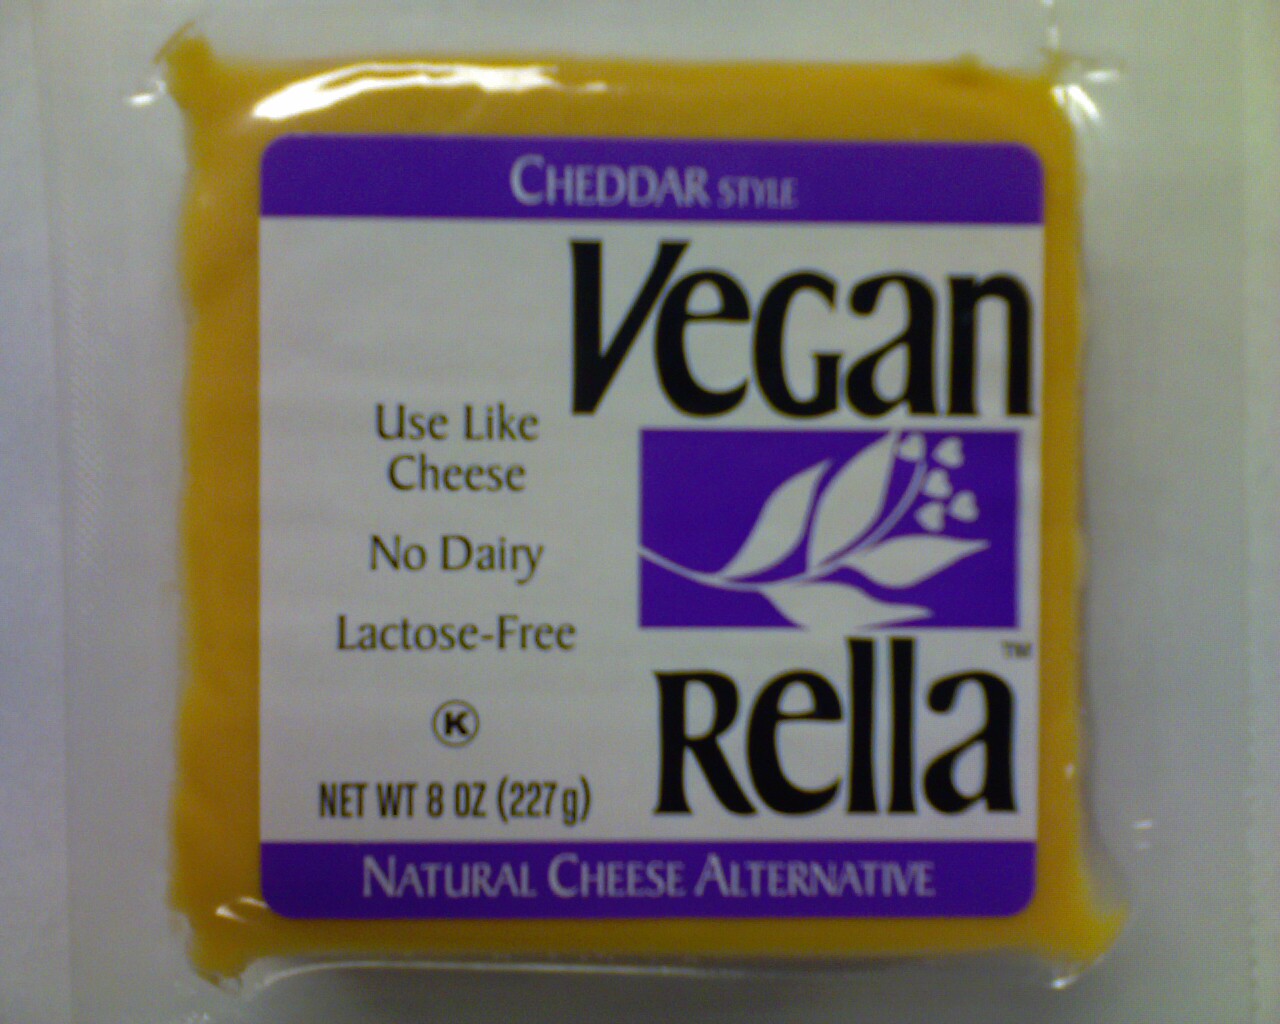 label from Front Label of Vegan Rella Cheddar Block